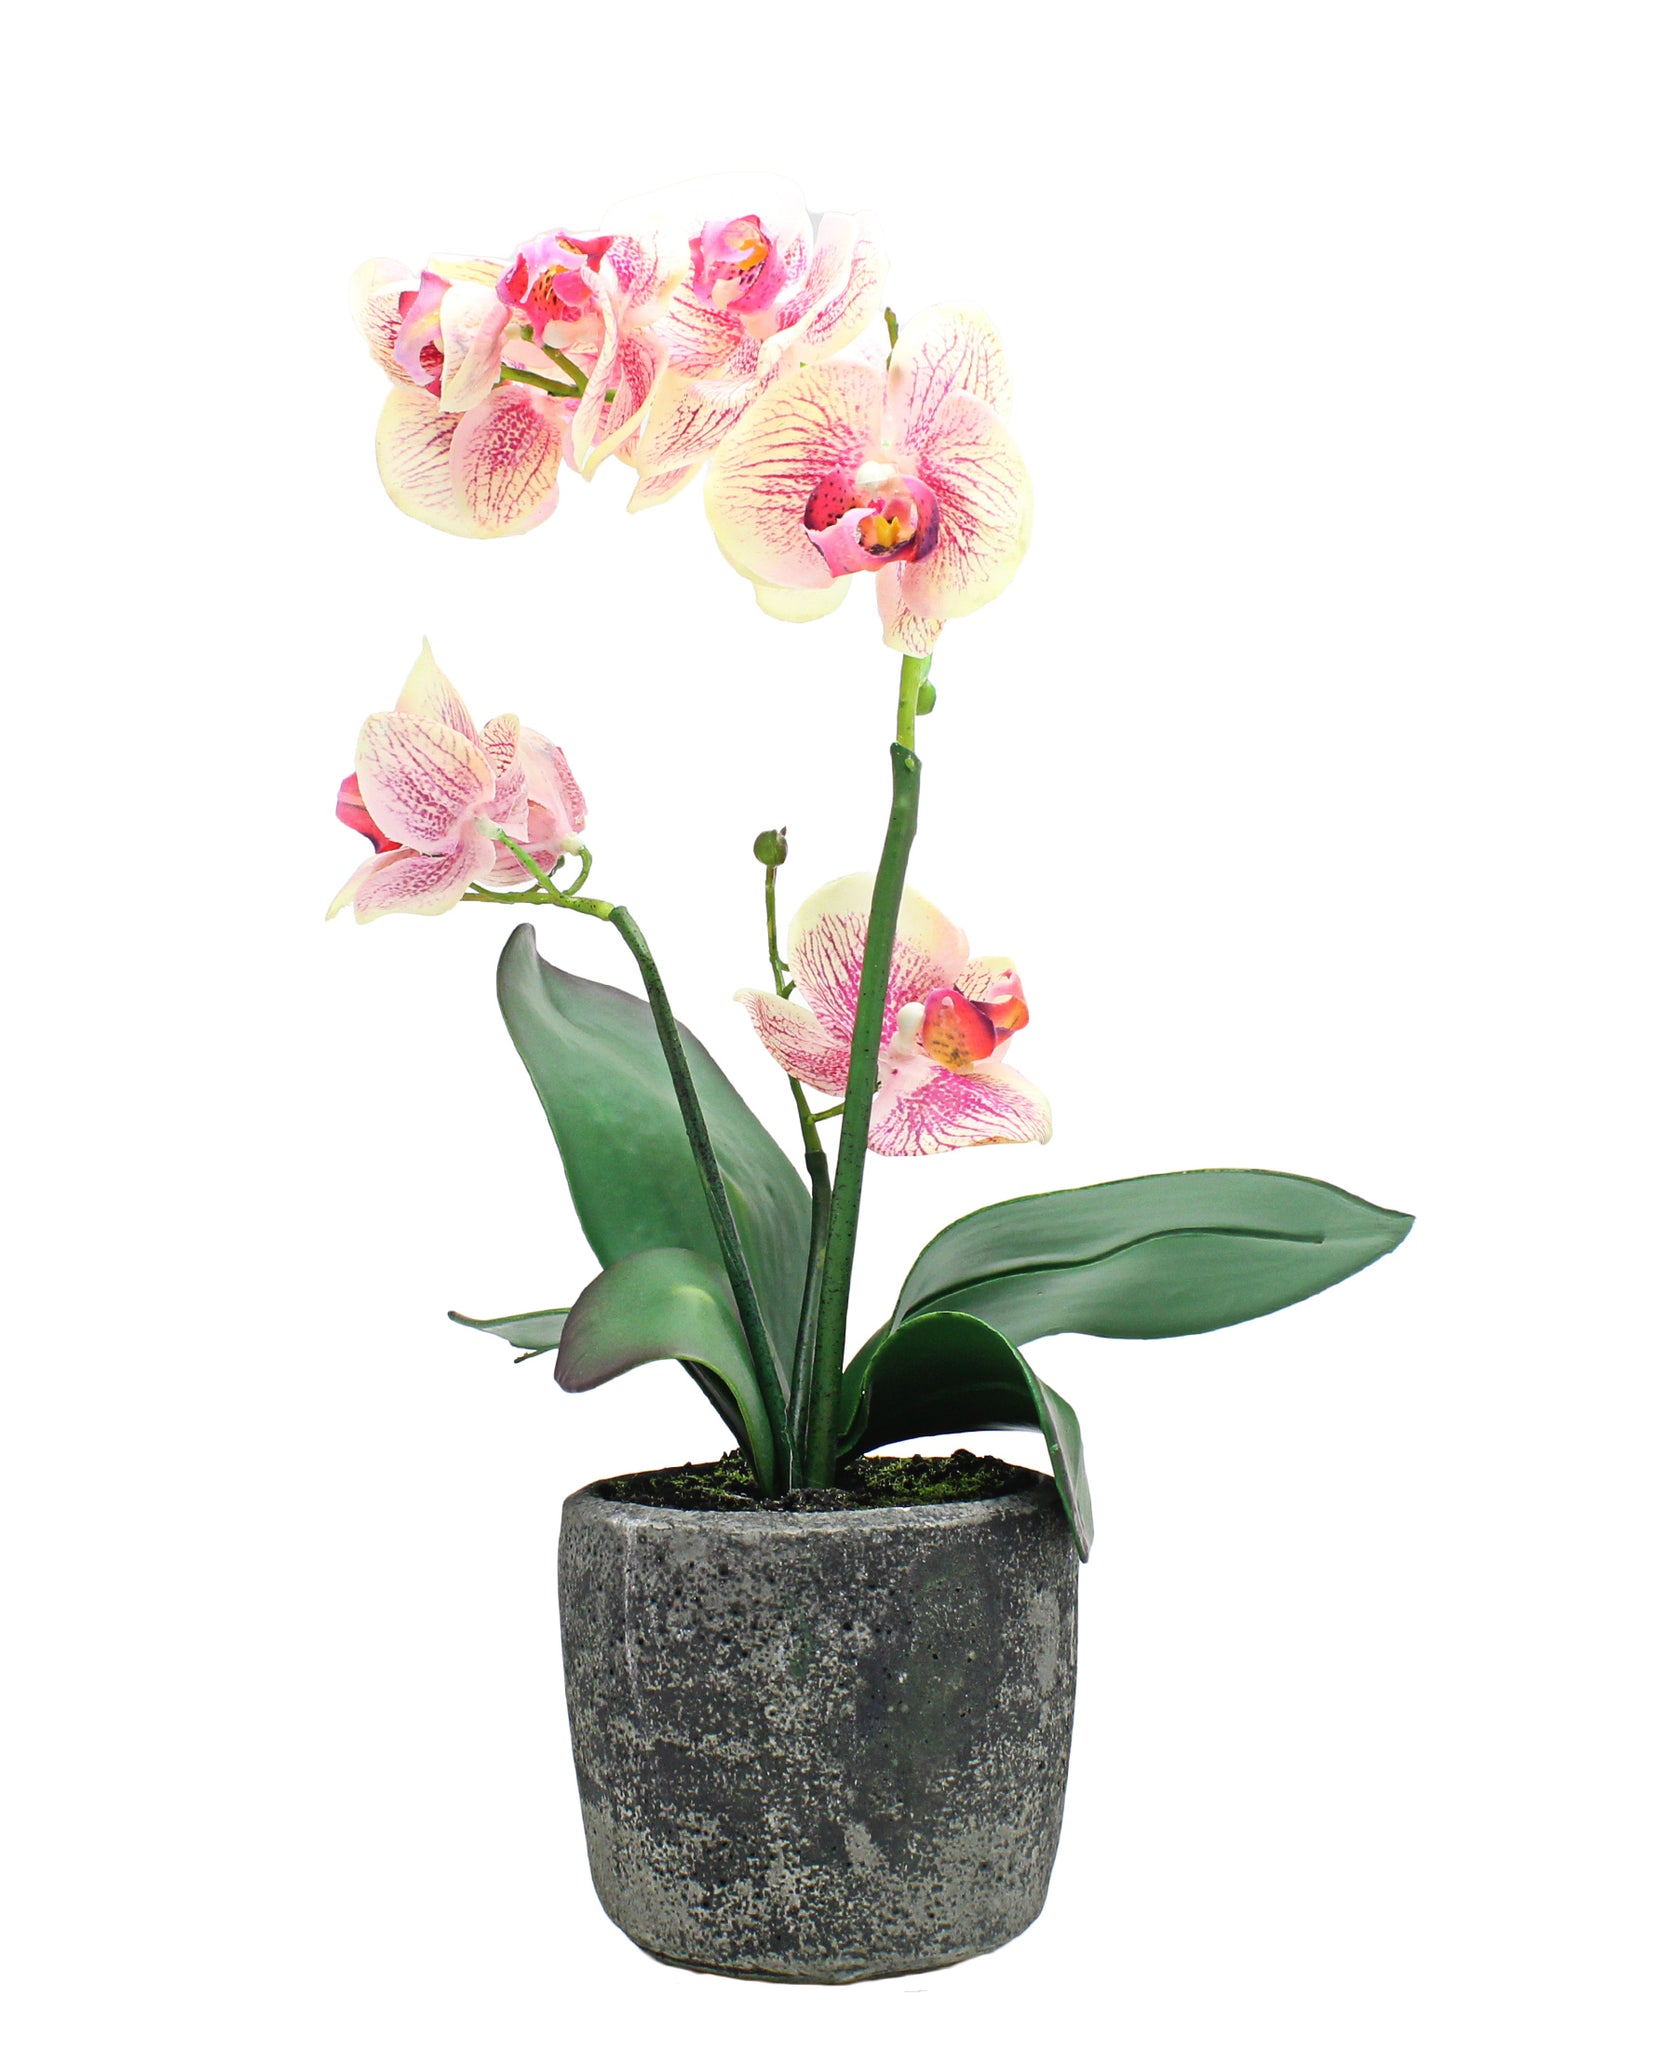 Urban Decor Orchid In Pot 35cm - Pink